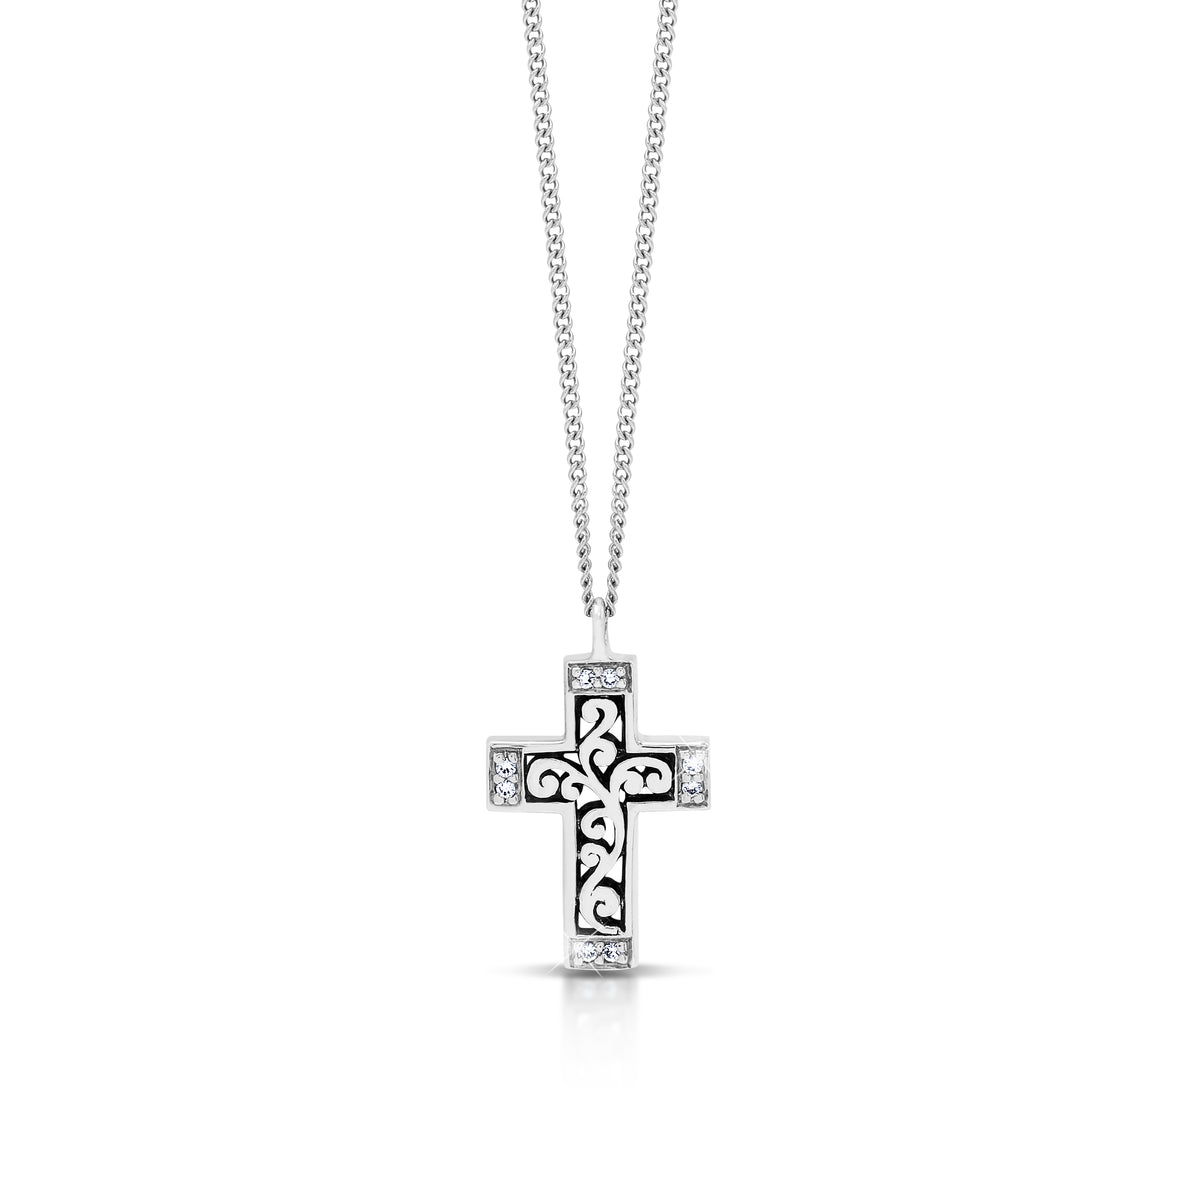 Small Open Scroll Cross Pendant with Diamond Accents Necklace - Lois Hill Jewelry